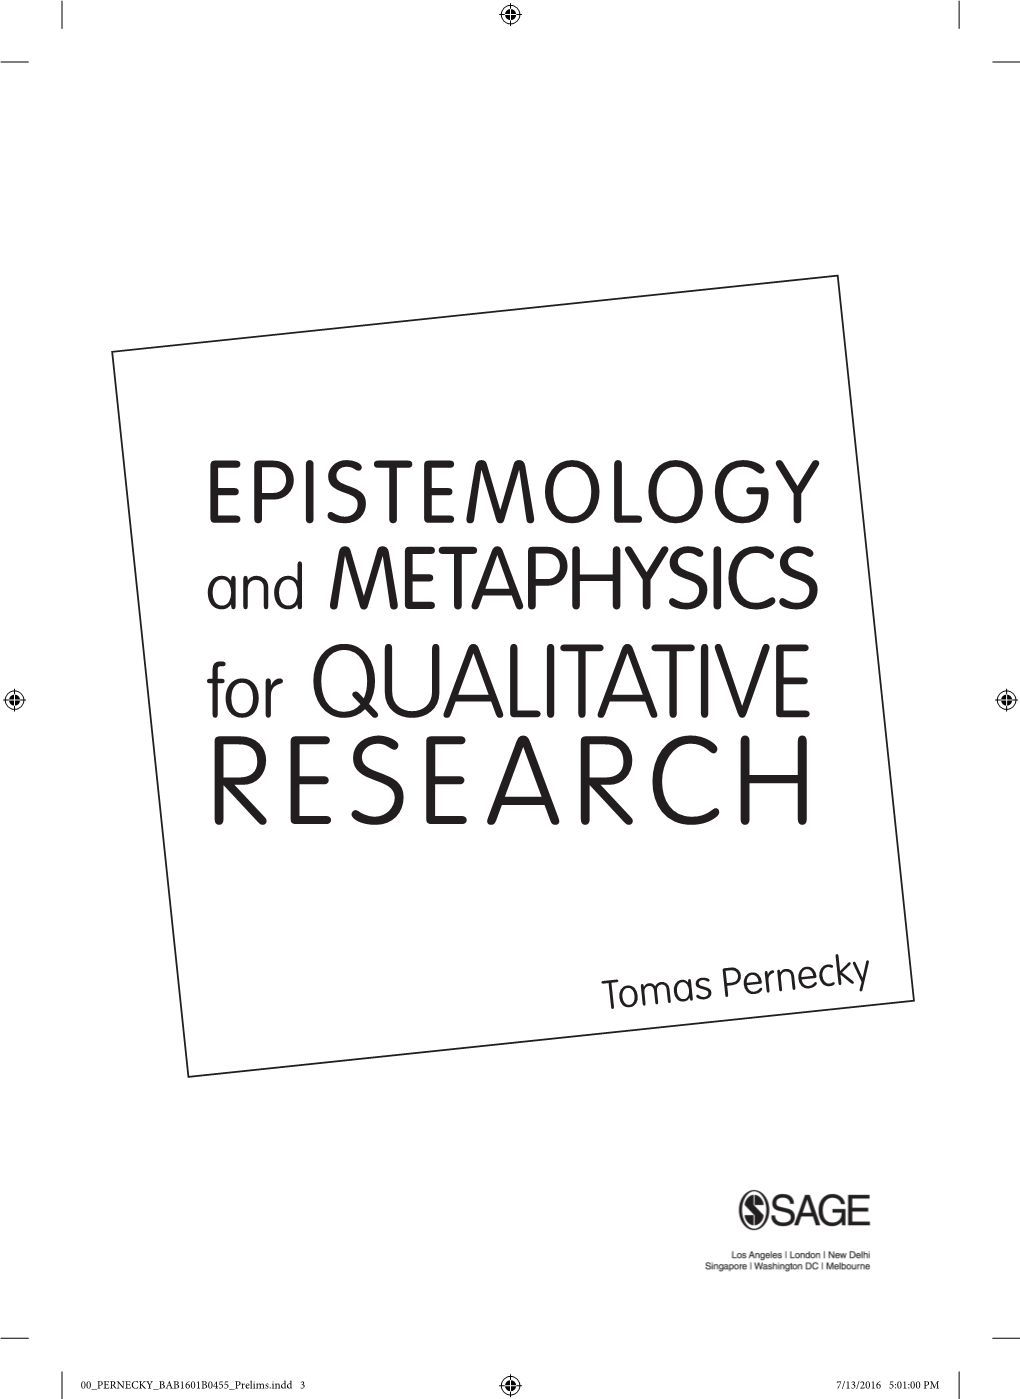 EPISTEMOLOGY and METAPHYSICS for QUALITATIVE RESEARCH